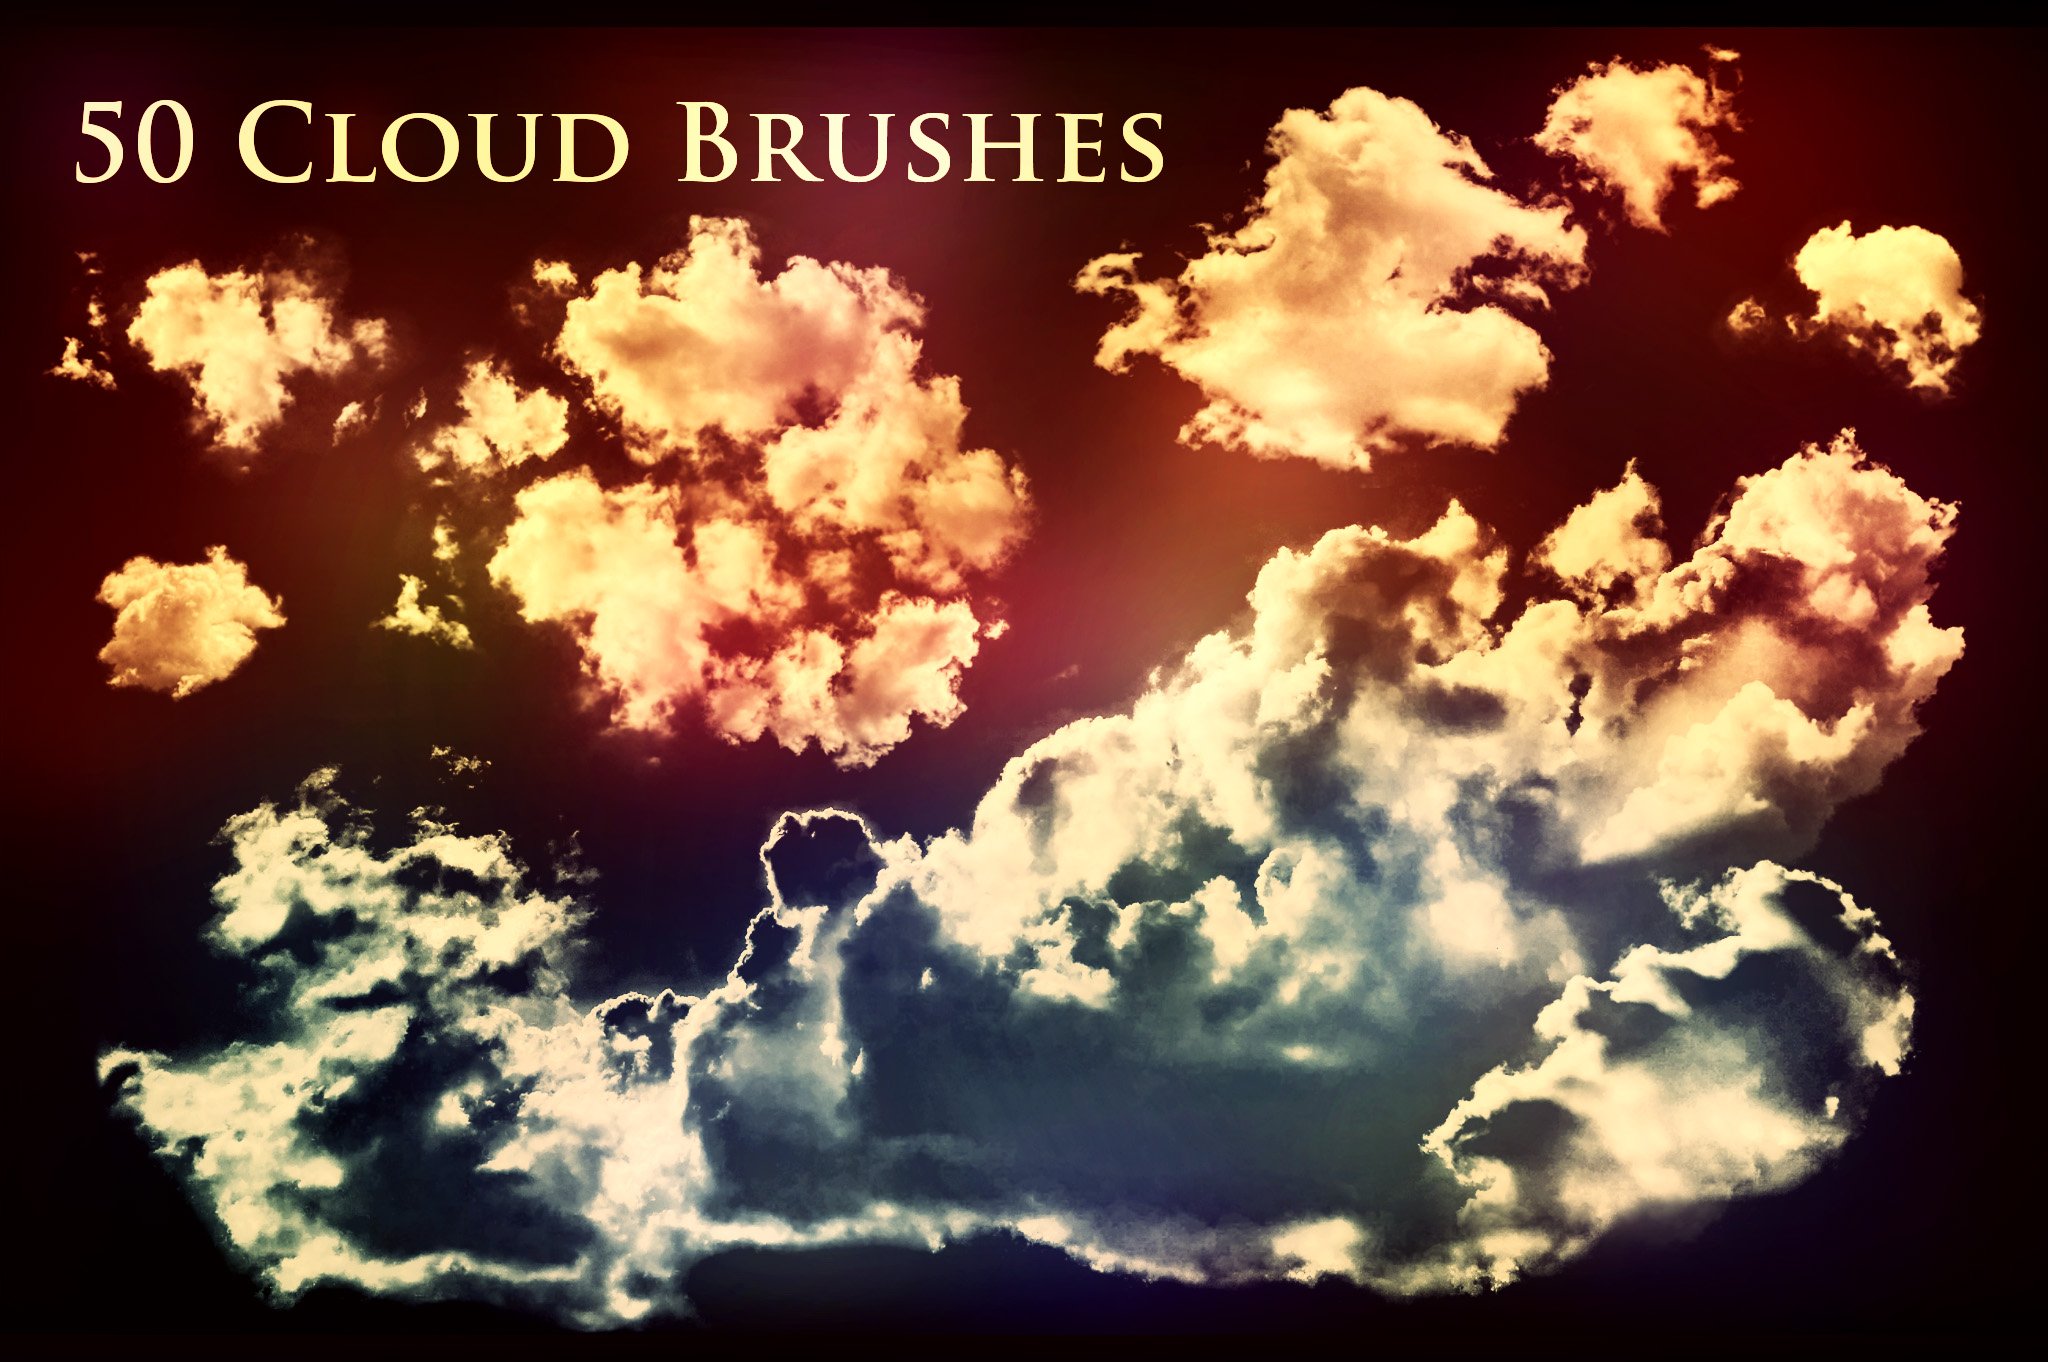 50 Cloud Brushescover image.